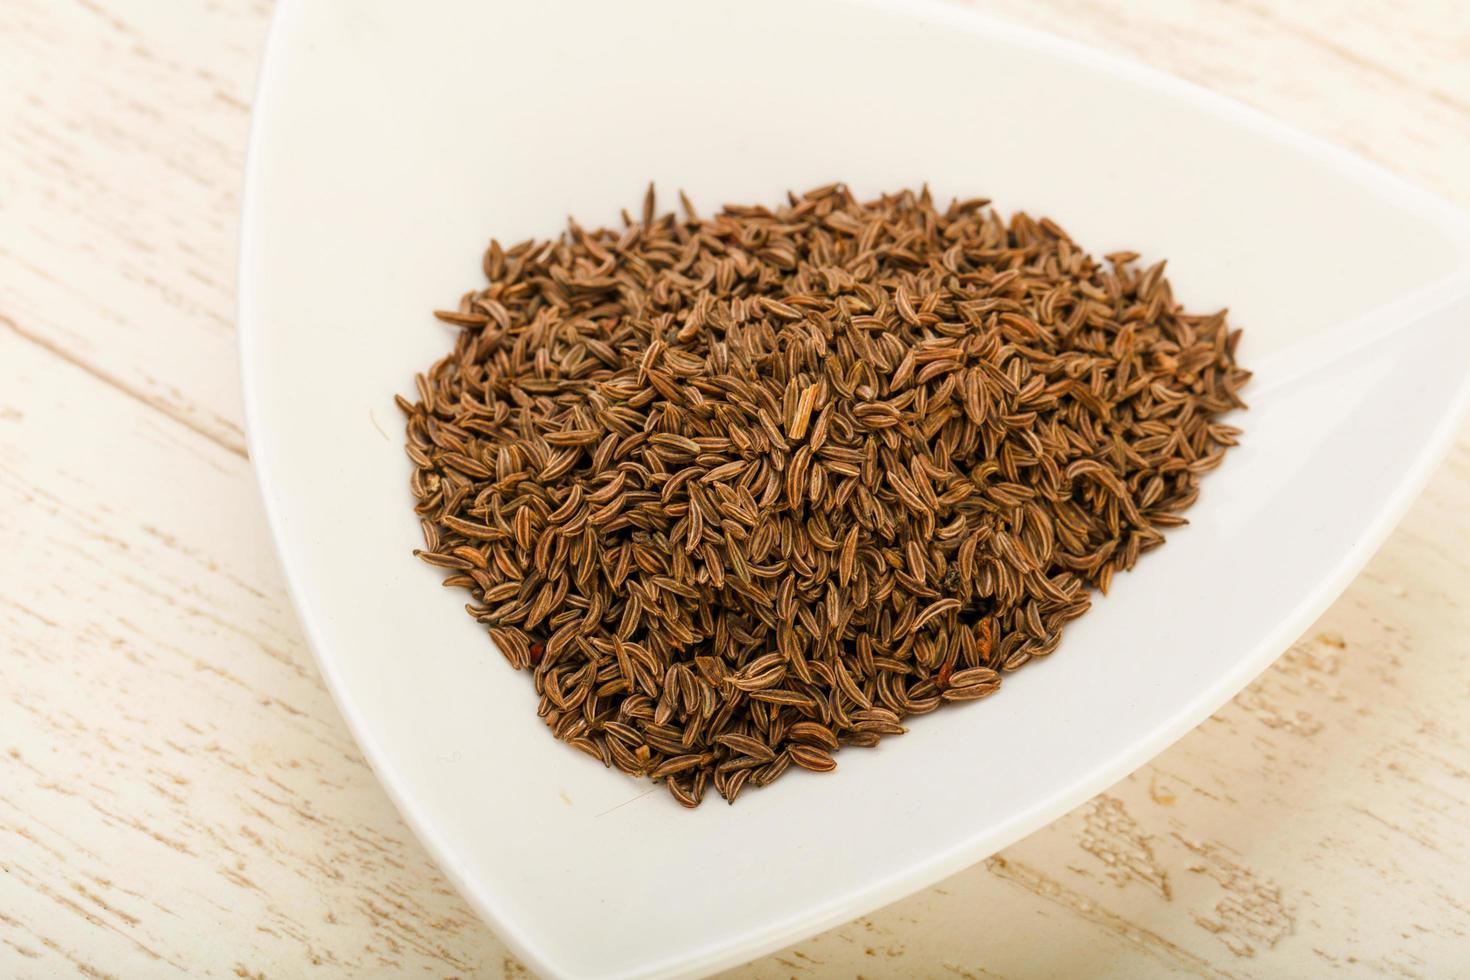 Caraway pile in a bowl on wooden background photo